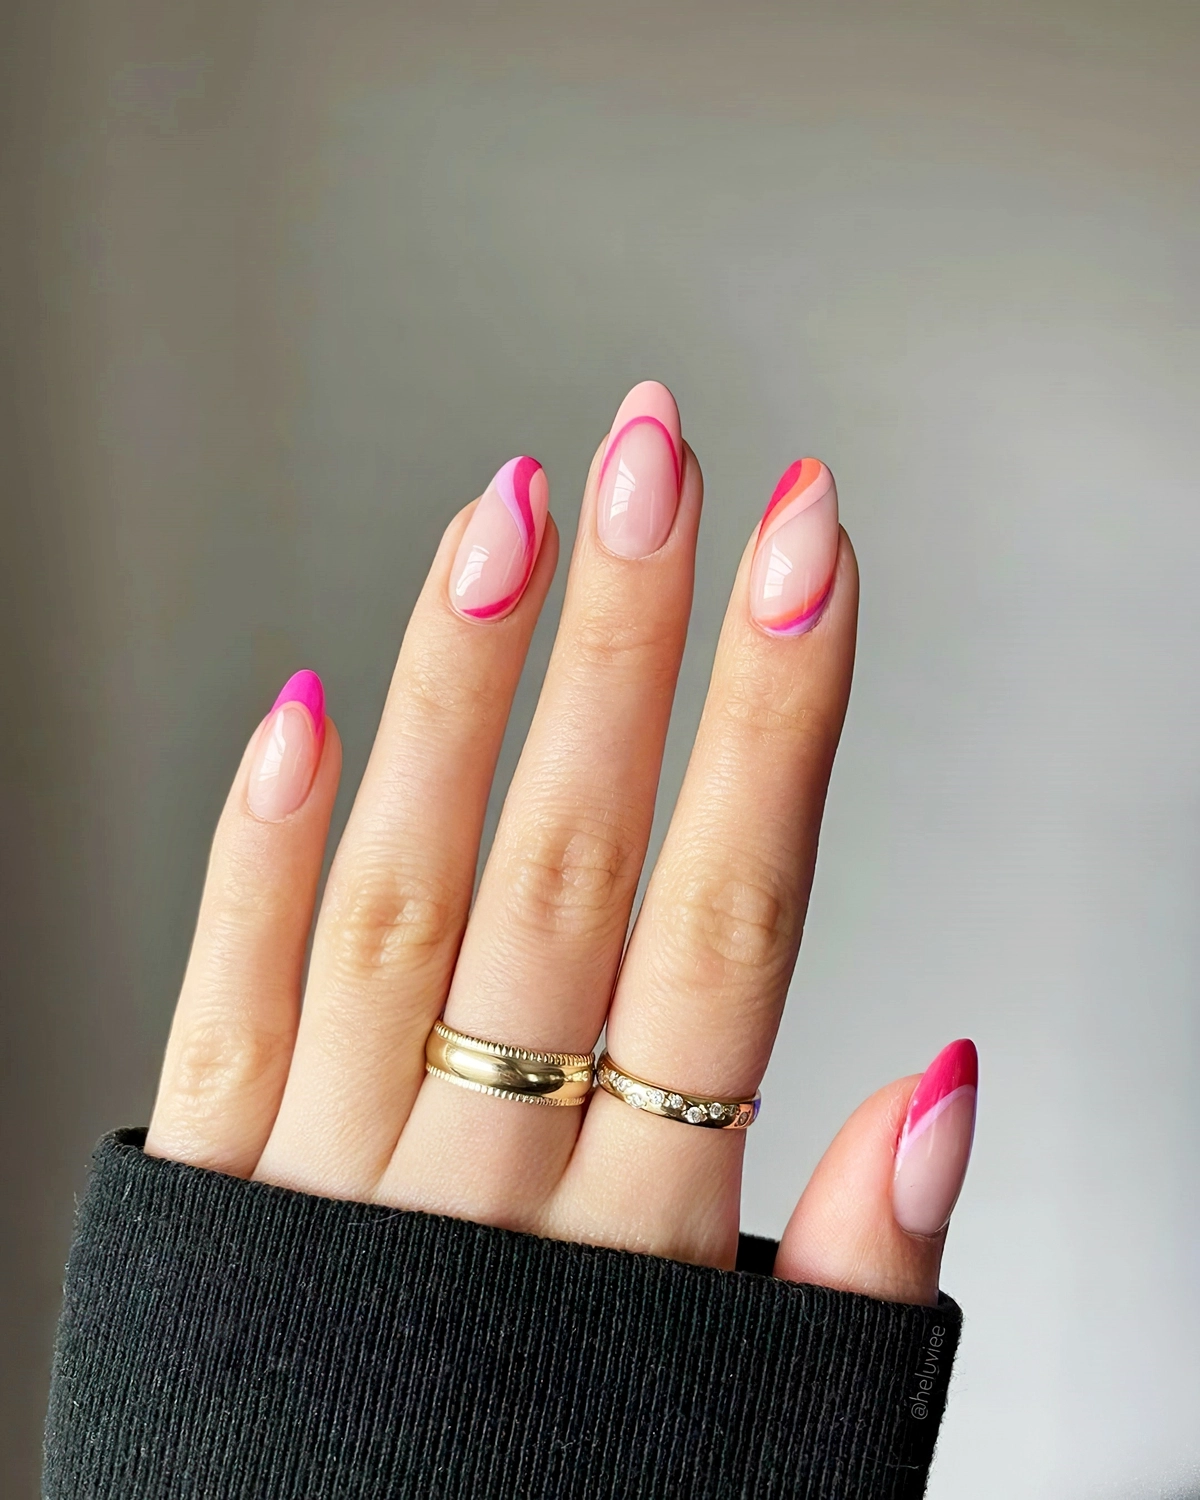 french nails farbig swirl naegel in rosa nueancen heluviee